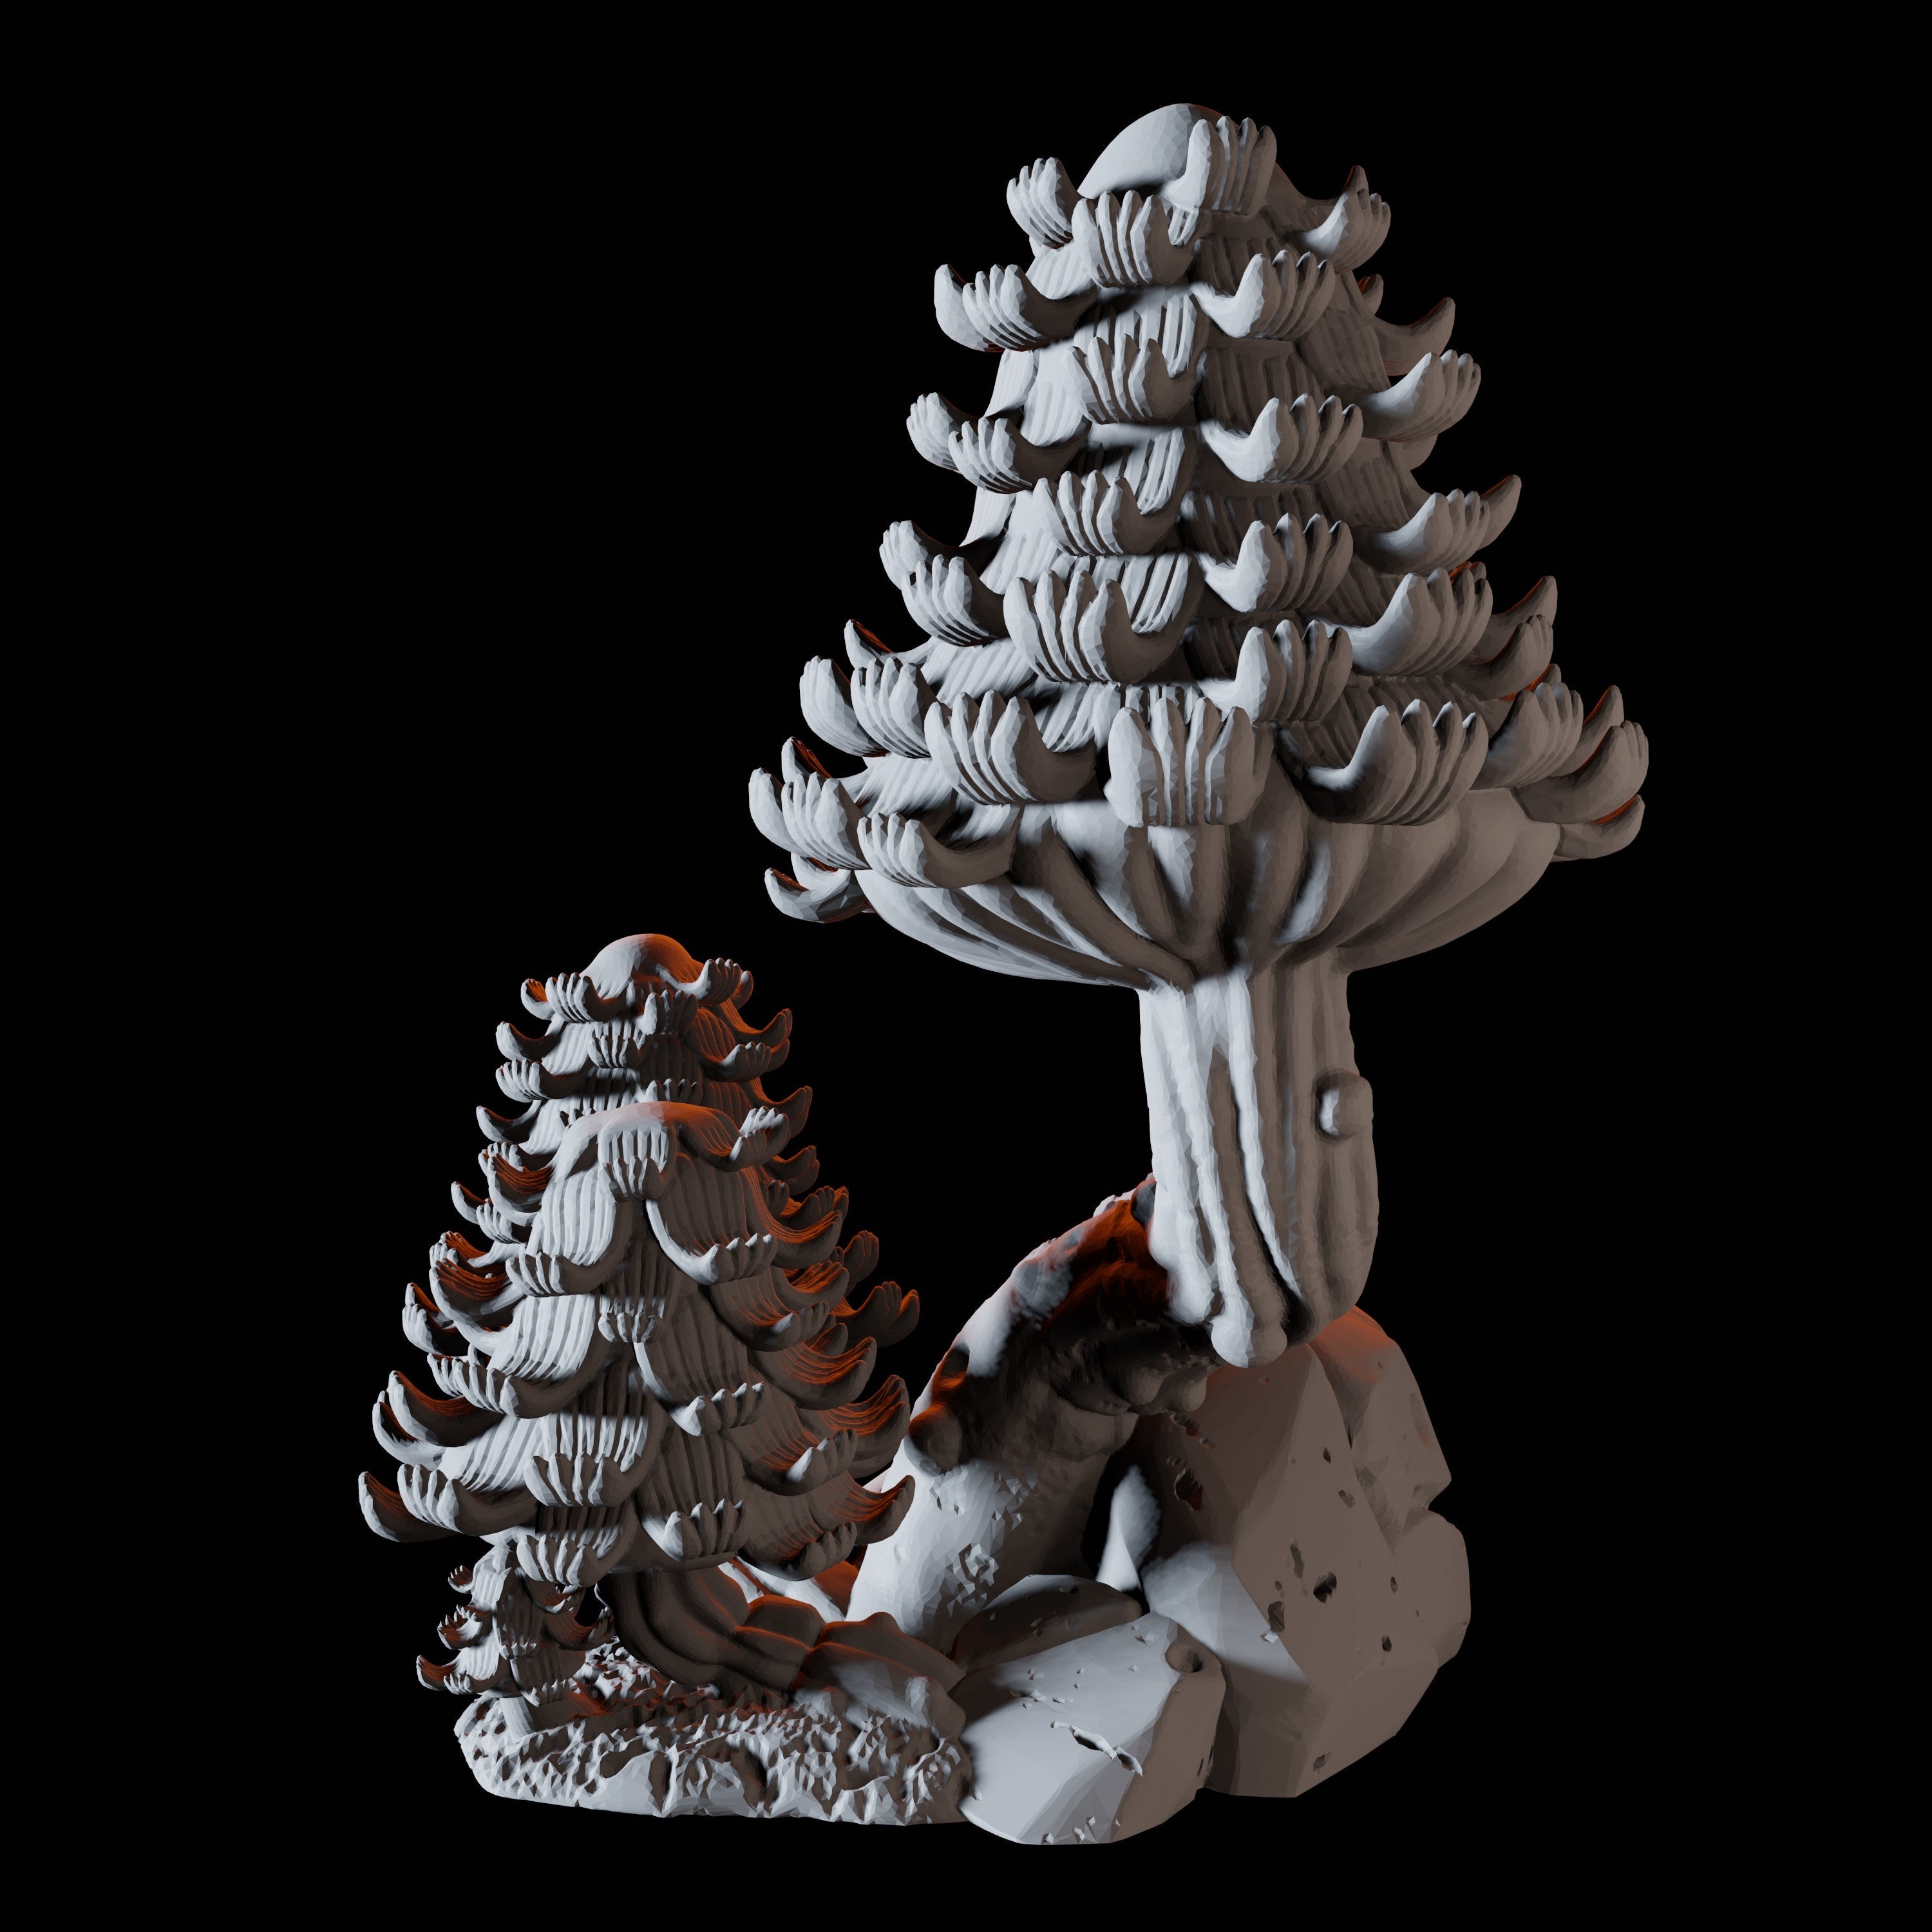 Big Peeled Mushroom Miniature for Dungeons and Dragons, Pathfinder or other TTRPGs